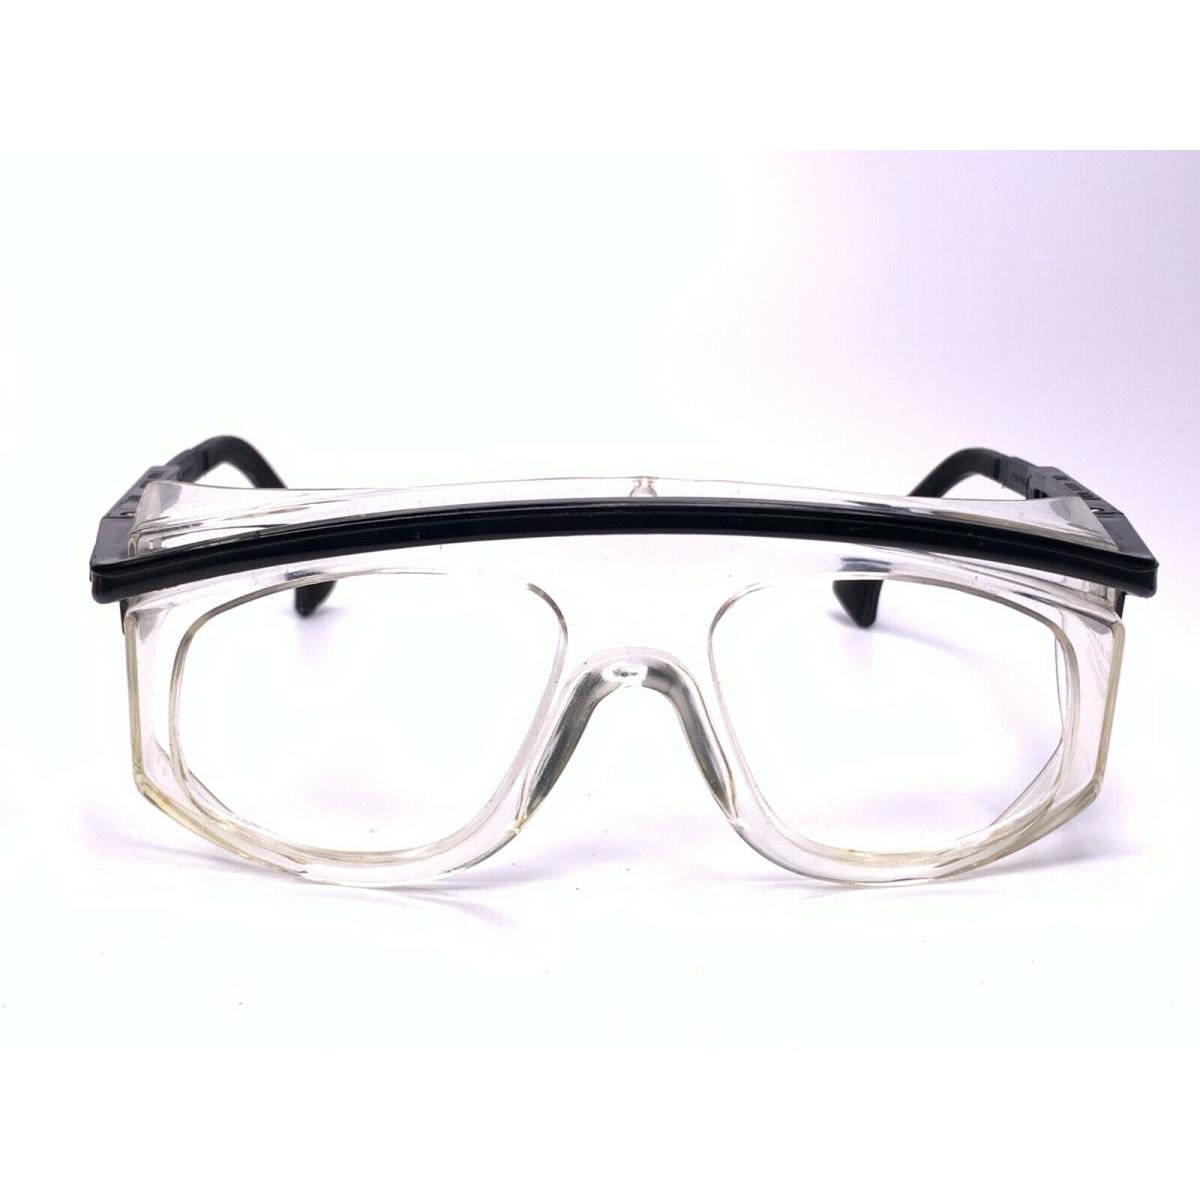 Uvex Z87 Astro 3003-L1 Black Clear Safety Goggles Glasses Frames 54-20-130 A1